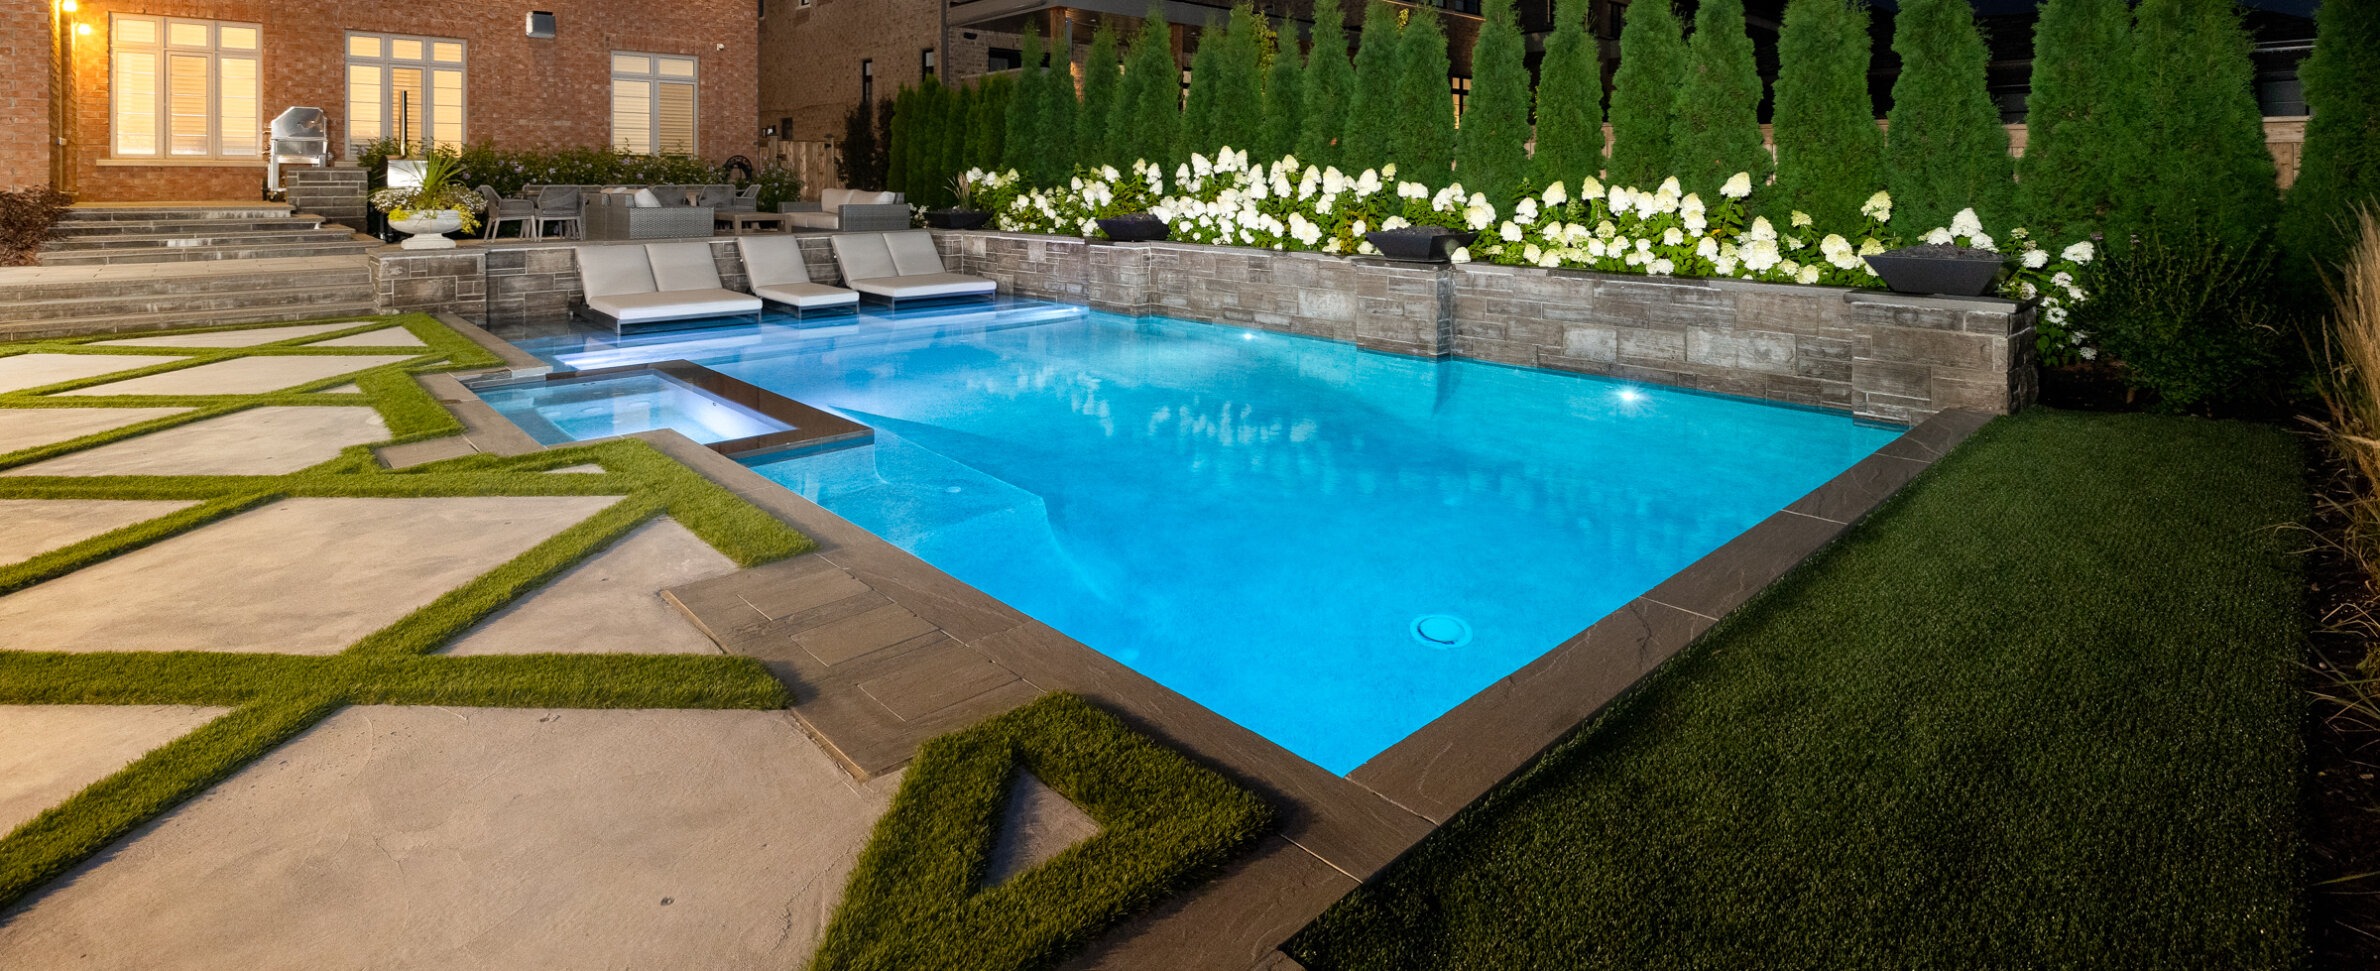 A luxurious backyard at dusk featuring an illuminated blue swimming pool, stone patio, greenery, loungers, and an adjacent brick house.